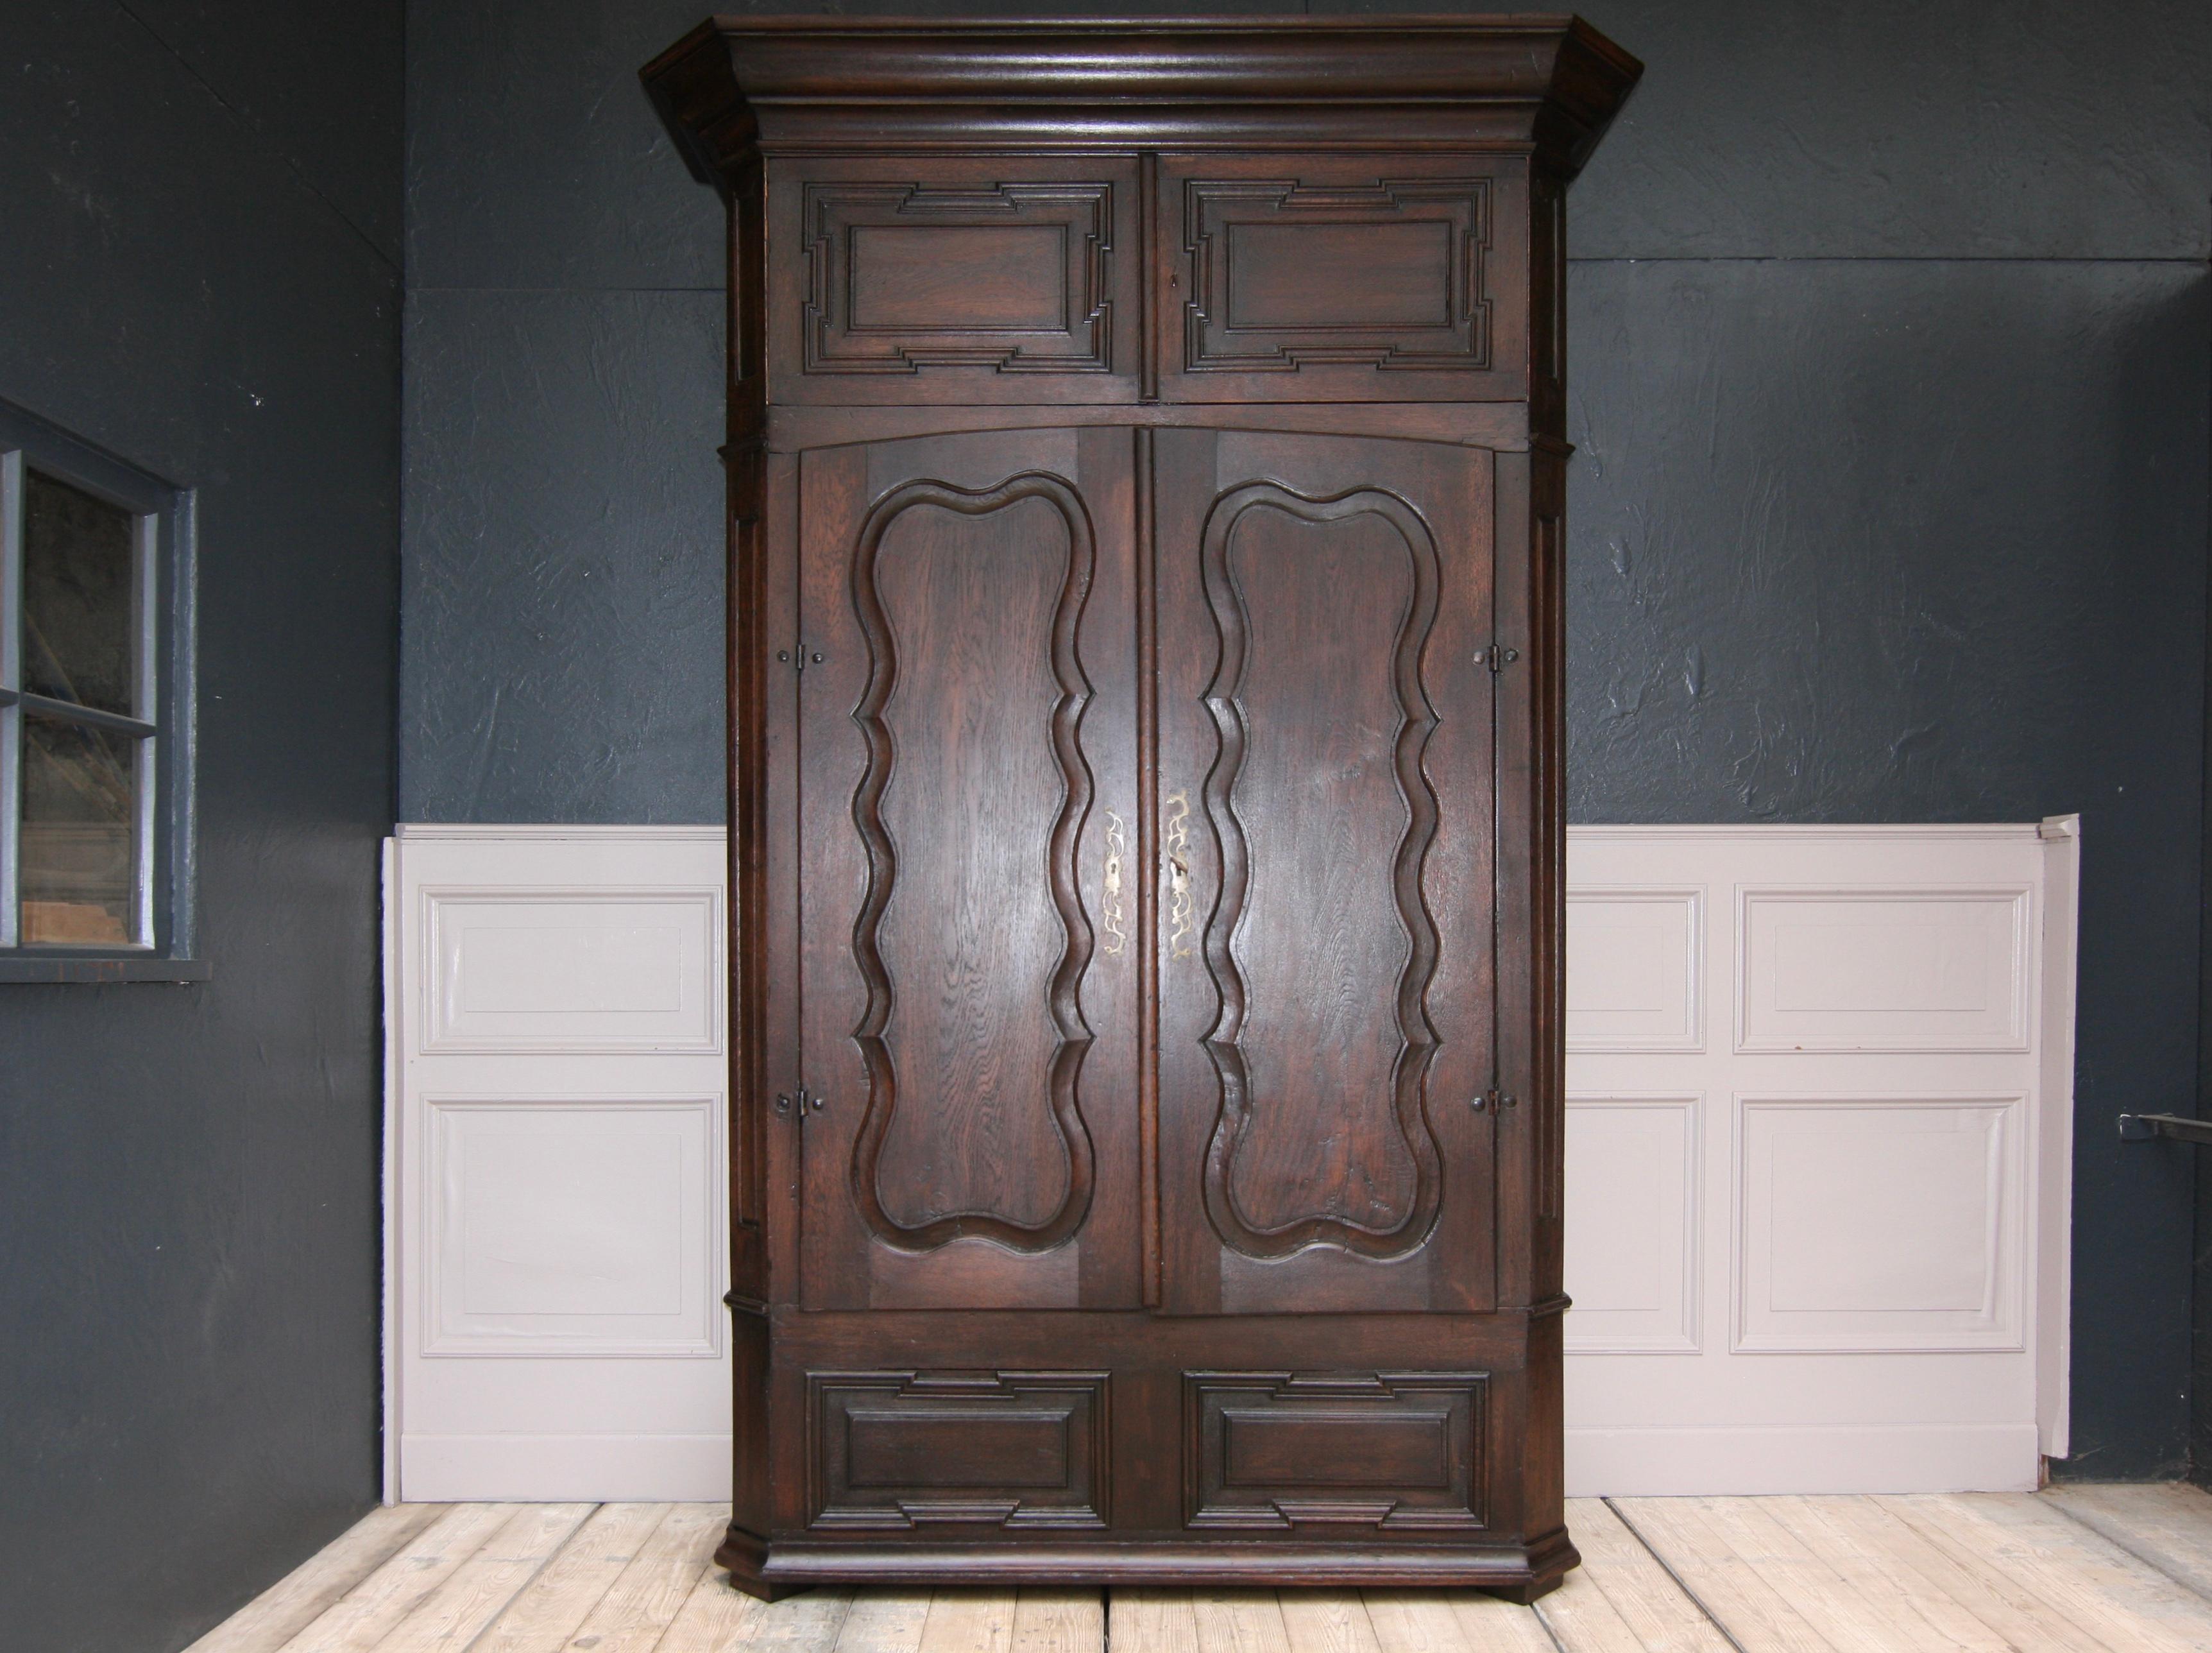 Antique cabinet or cupboard from a German monastery. Made of solid oak. Mostly from the late 18th century.

Body with beveled corners and protruding header. Cassettes on the side. Two large doors with curved, profiled panels. Above that, there are